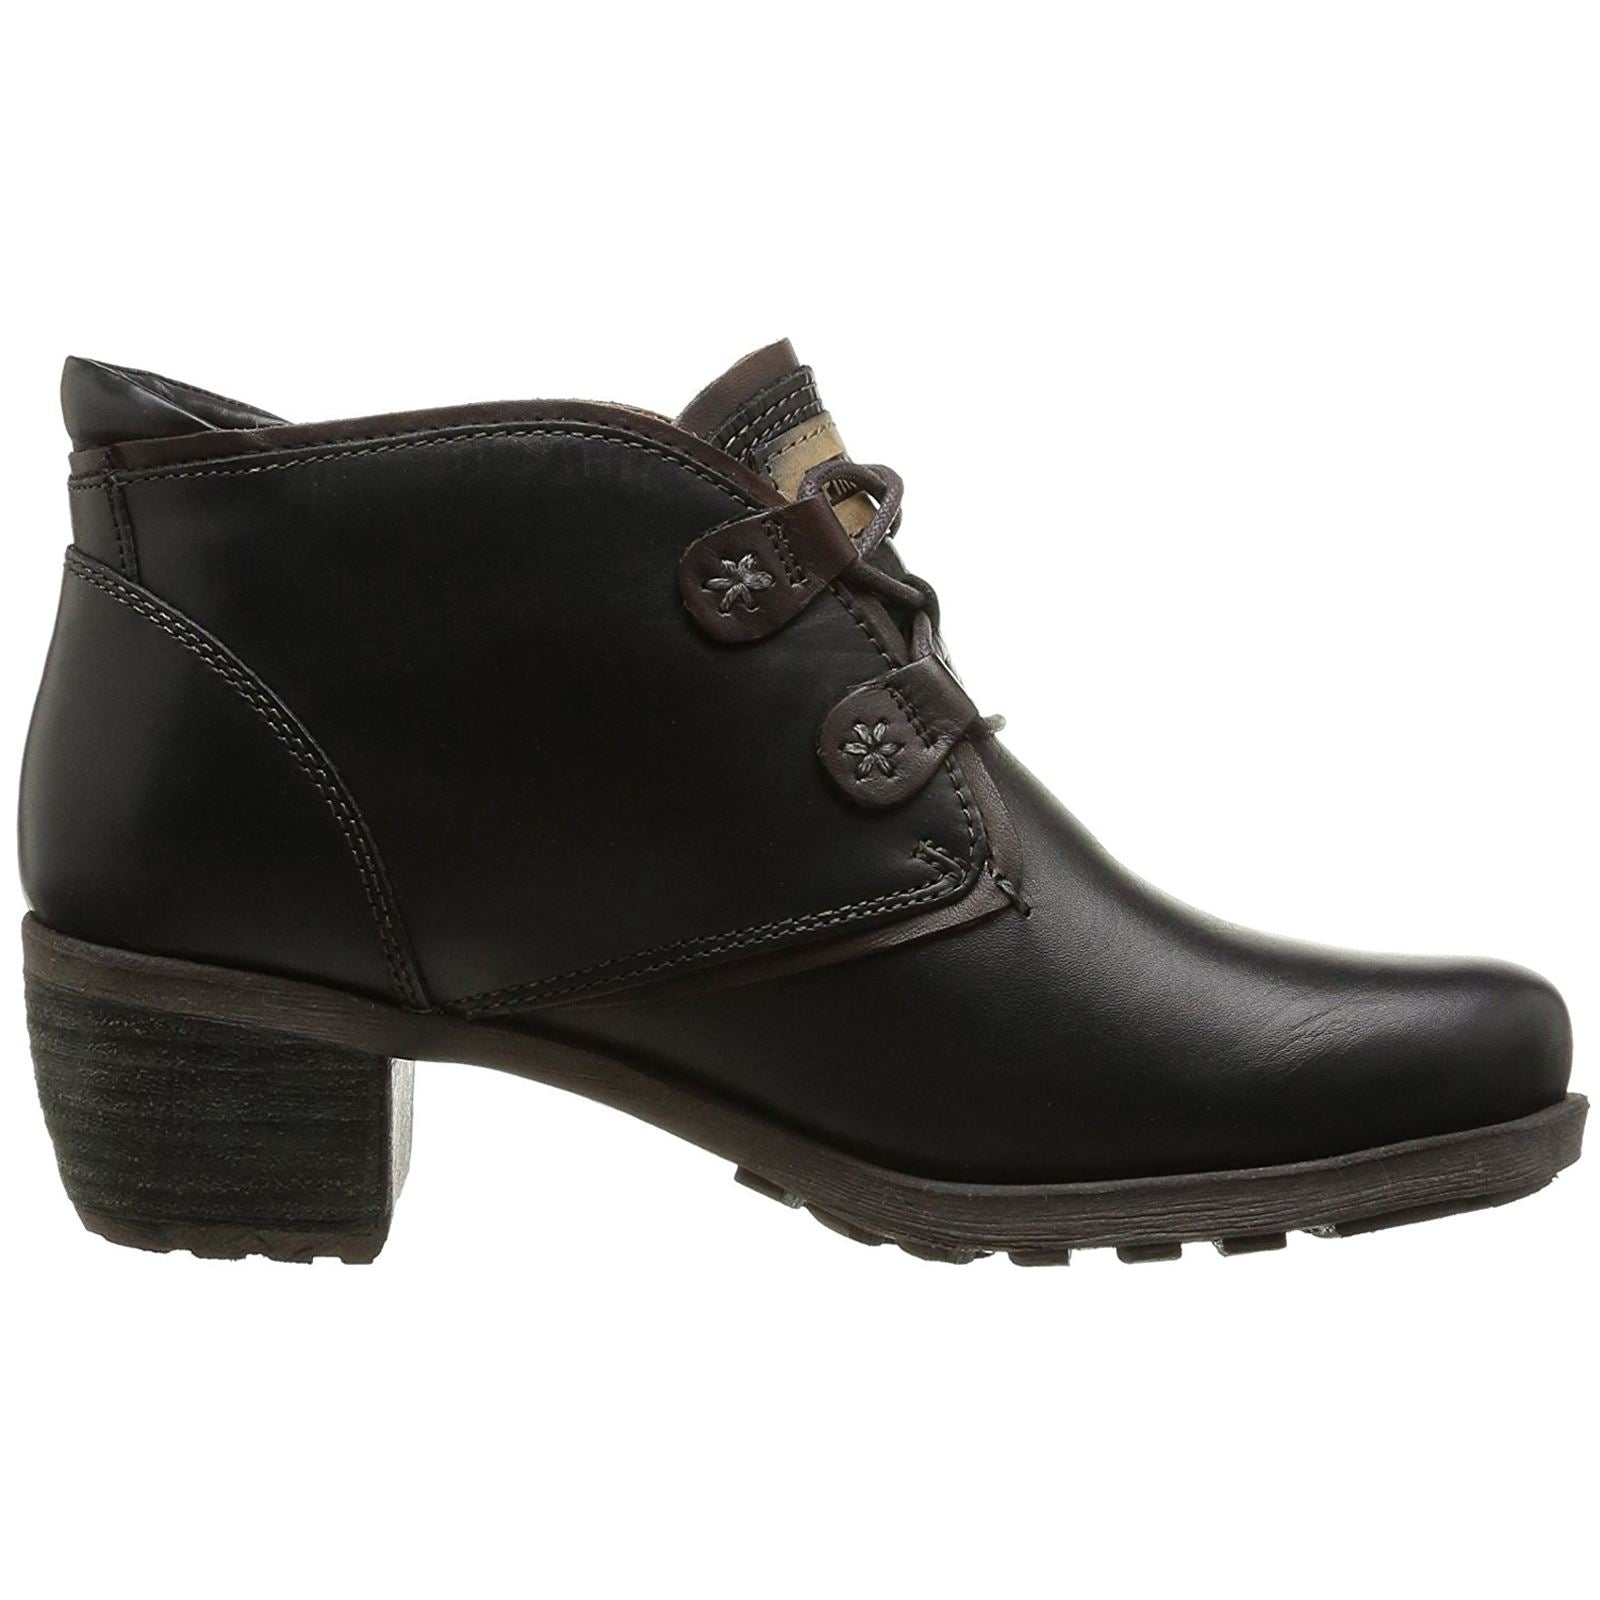 Pikolinos Le Mans 838-8657 Black Womens Leather Boots - UK 4